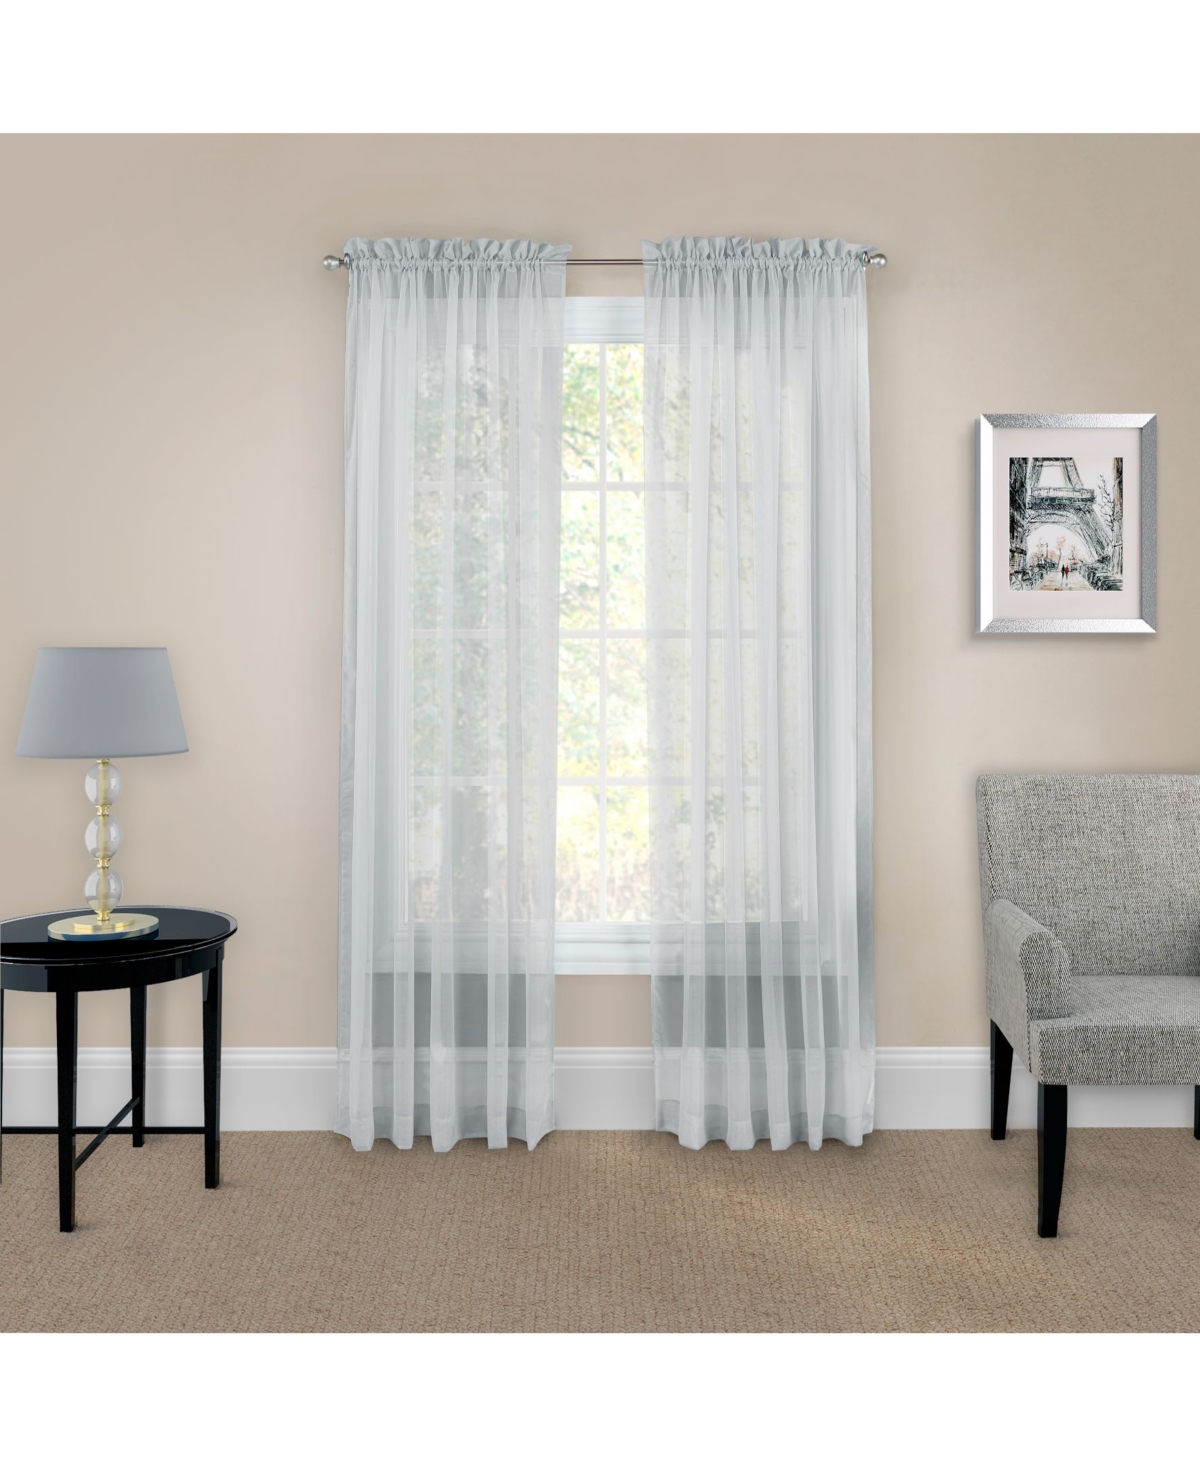 Eclipse Pairs To Go Victoria Voile 63" X 118" Curtain Panel, Set Of 2 In Charcoal